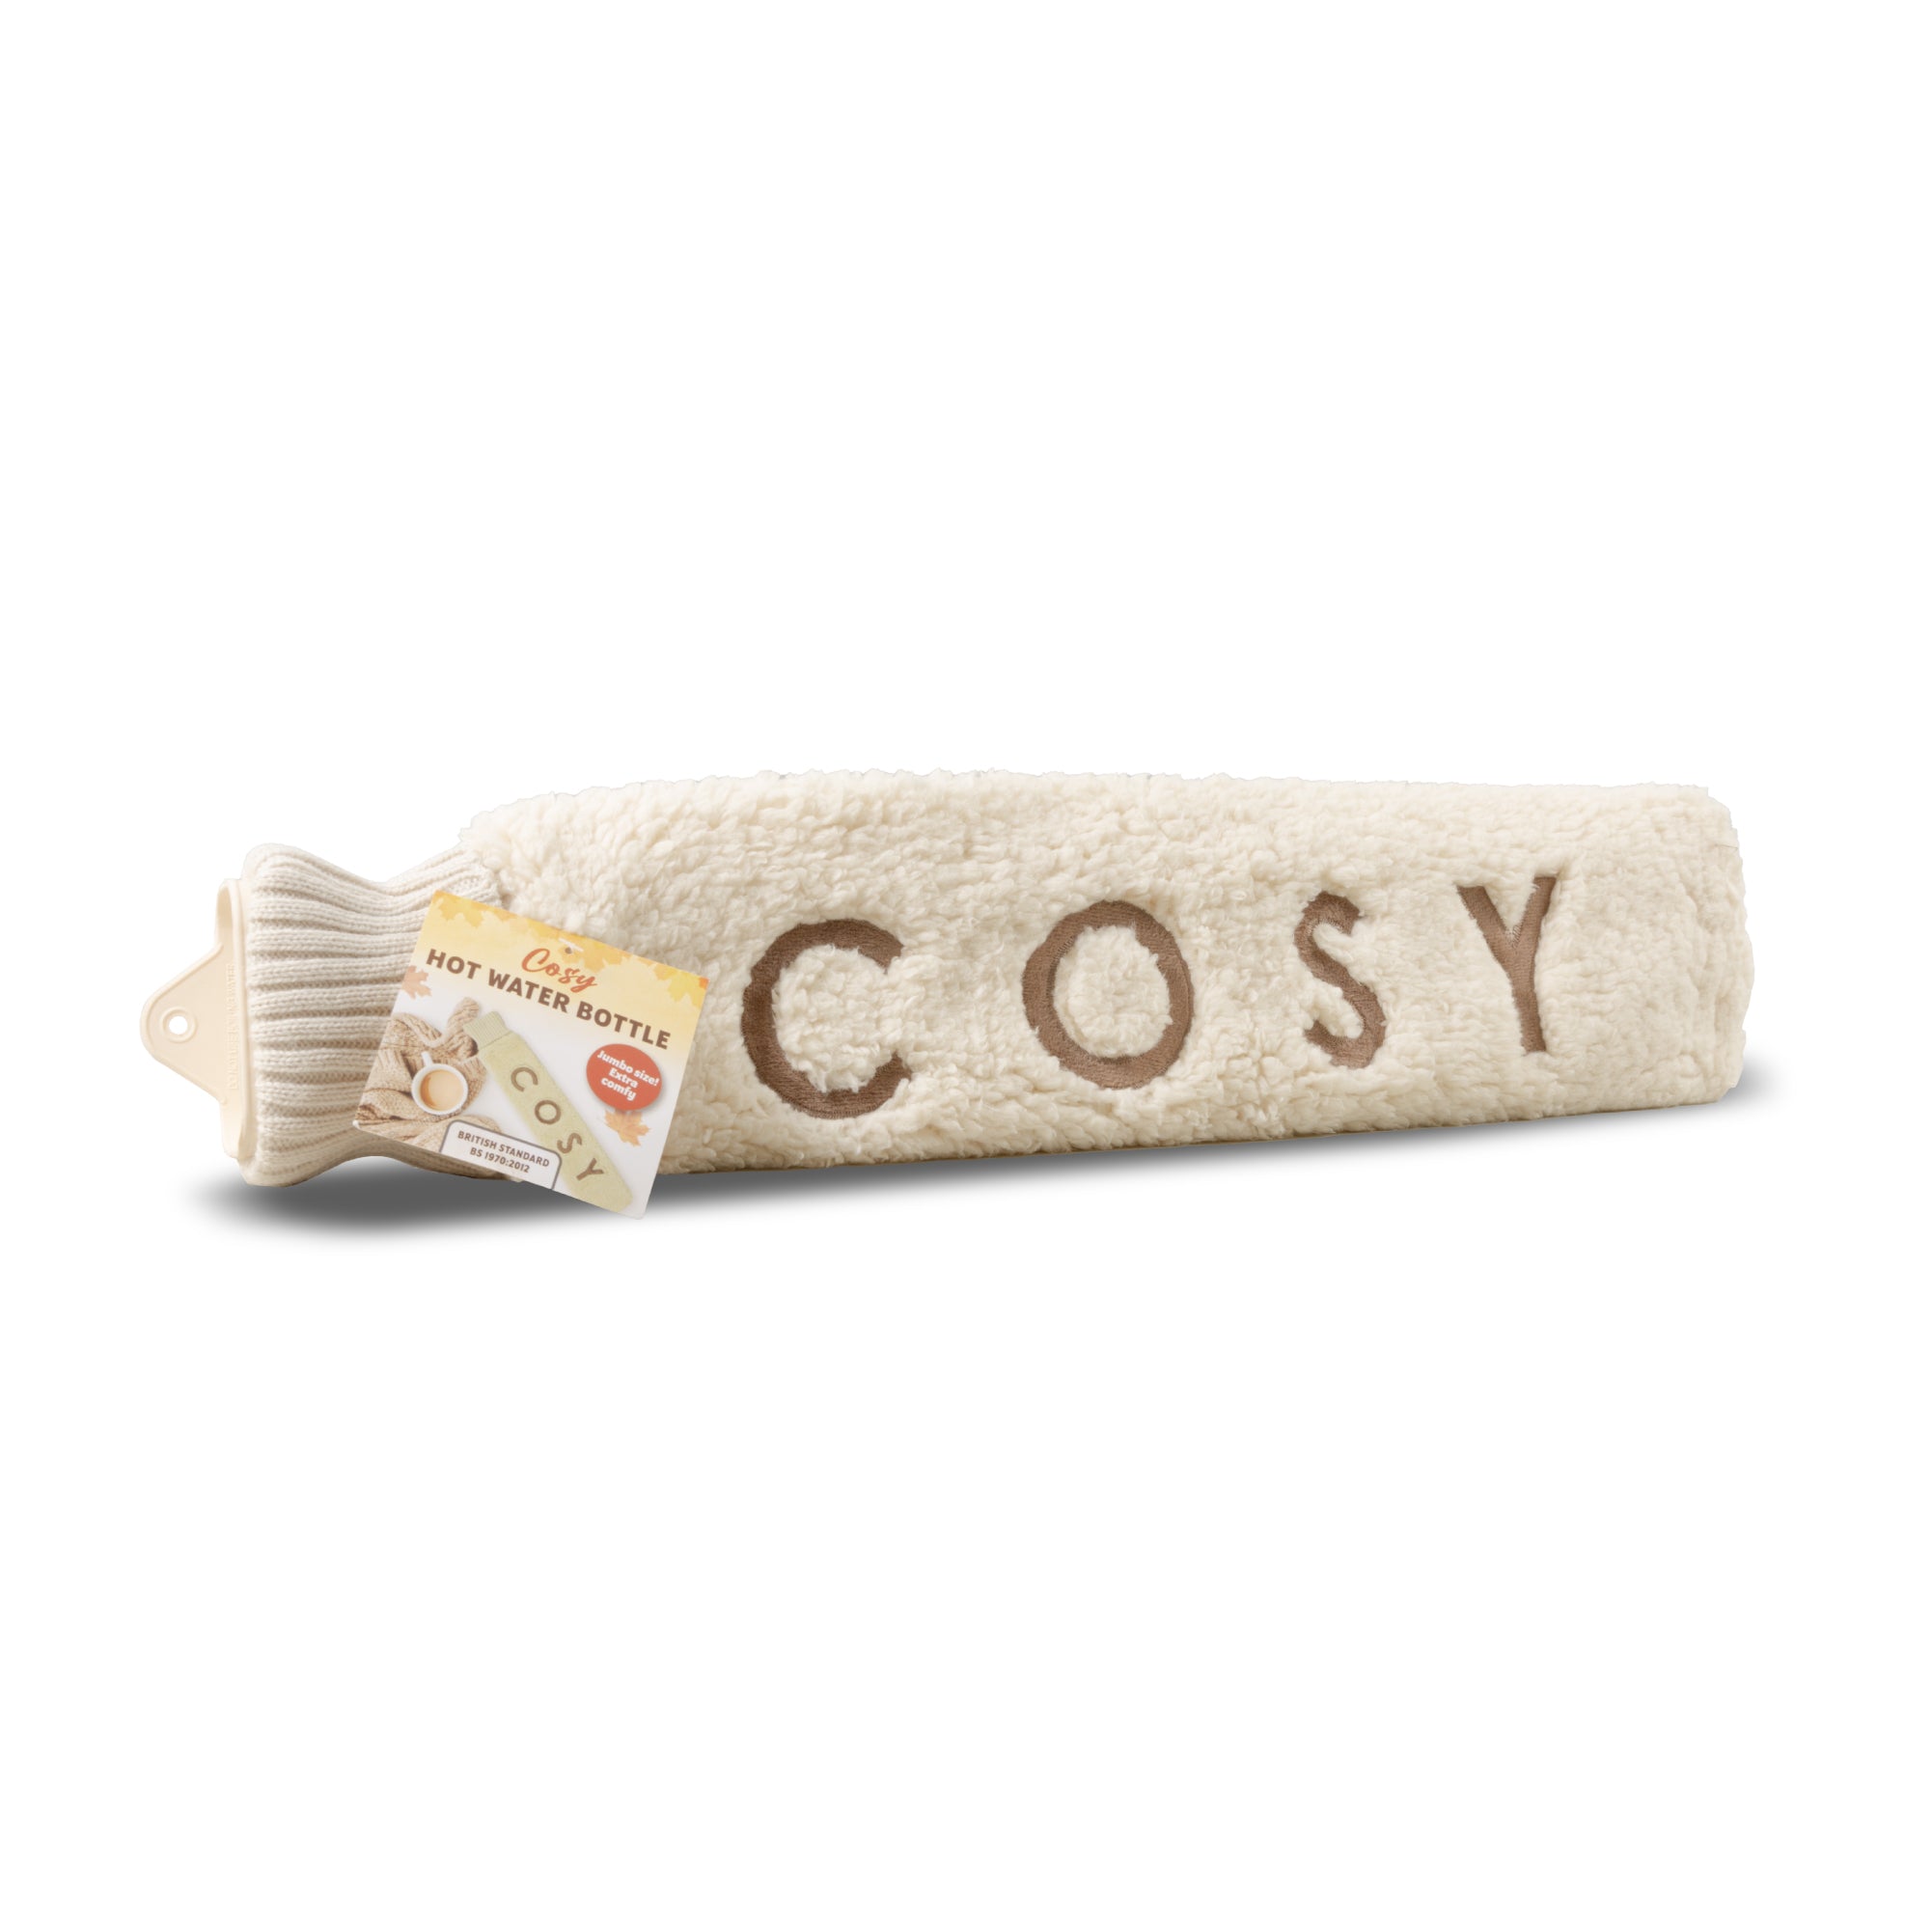 Cosy Hot Water Bottle with Super Soft Fleece